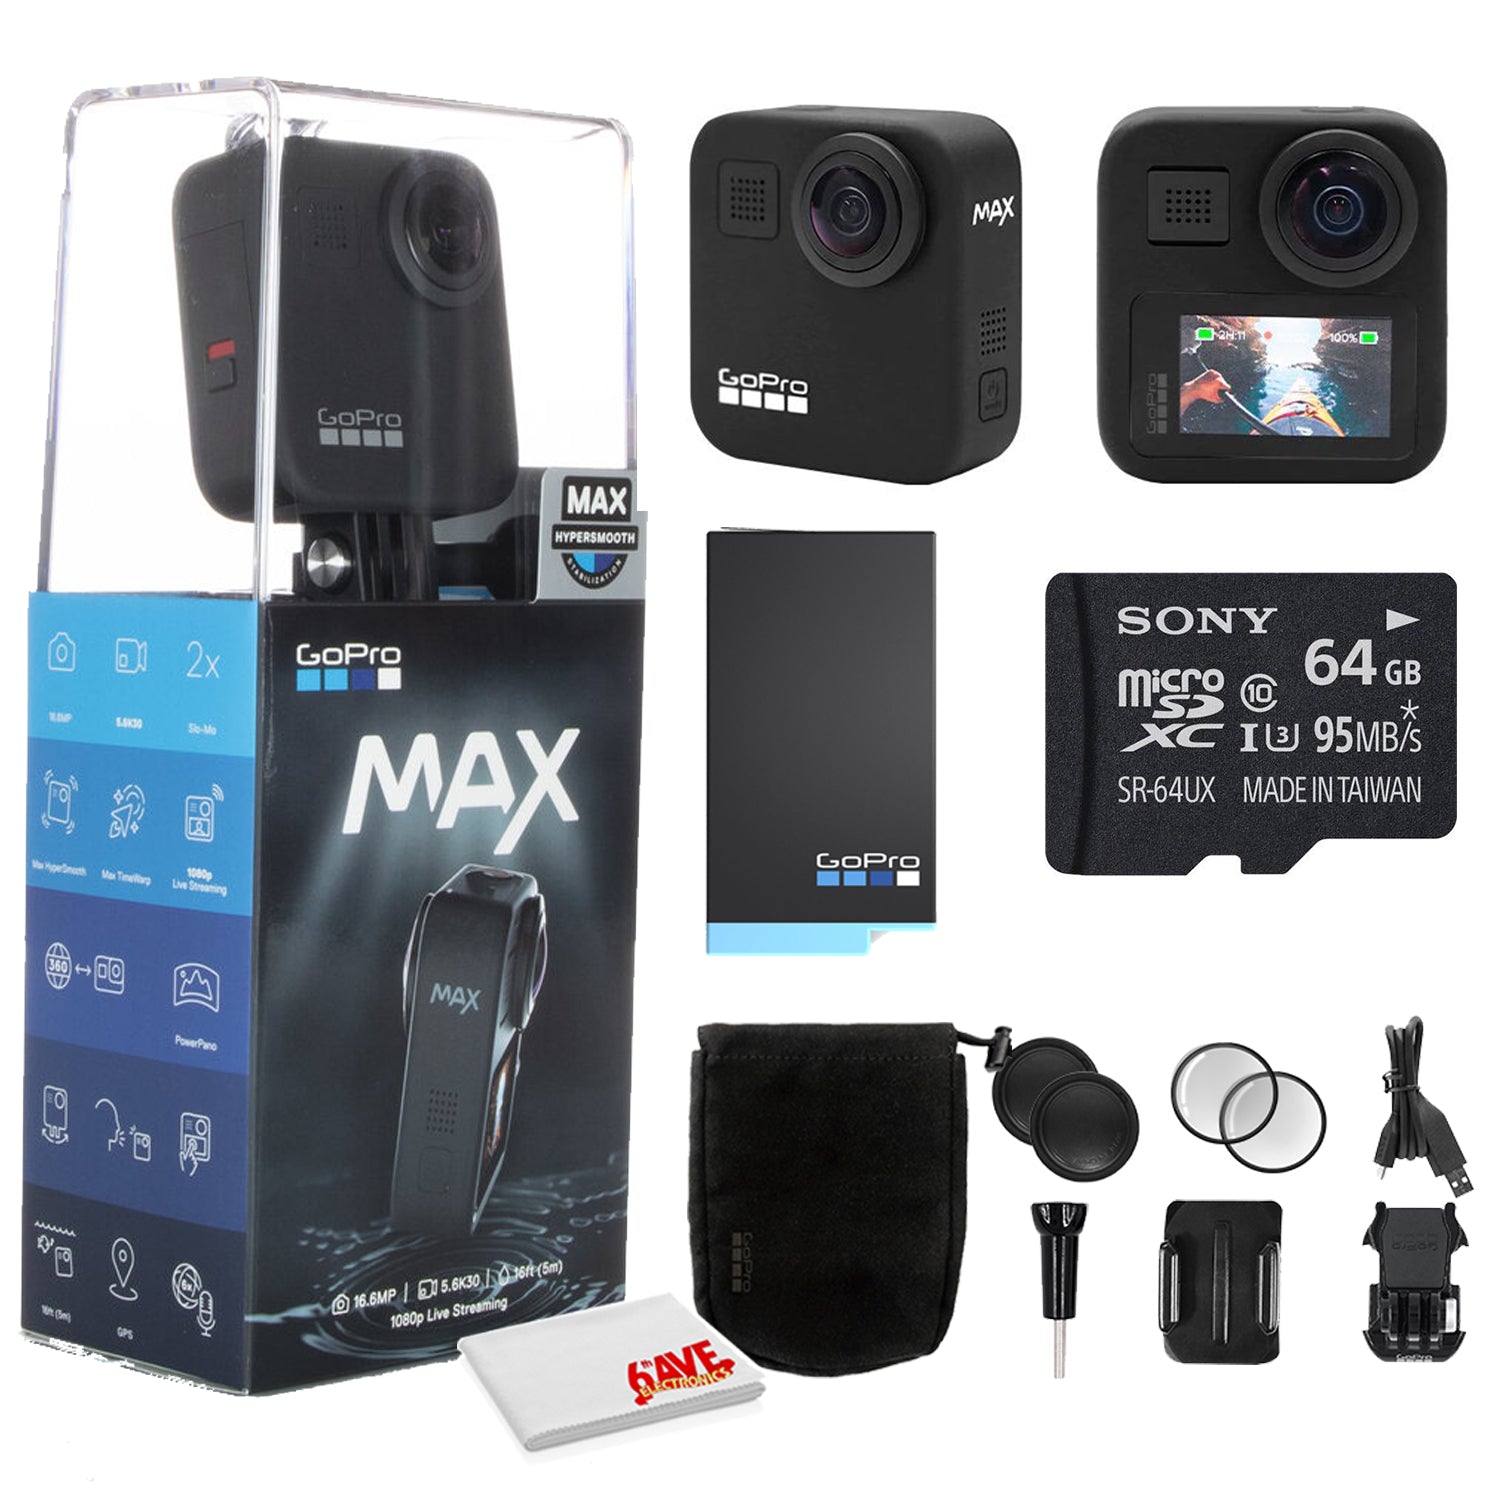 GoPro MAX 360 Waterproof Action Camera - With Cleaning Set + 64GB Memory Card and More.